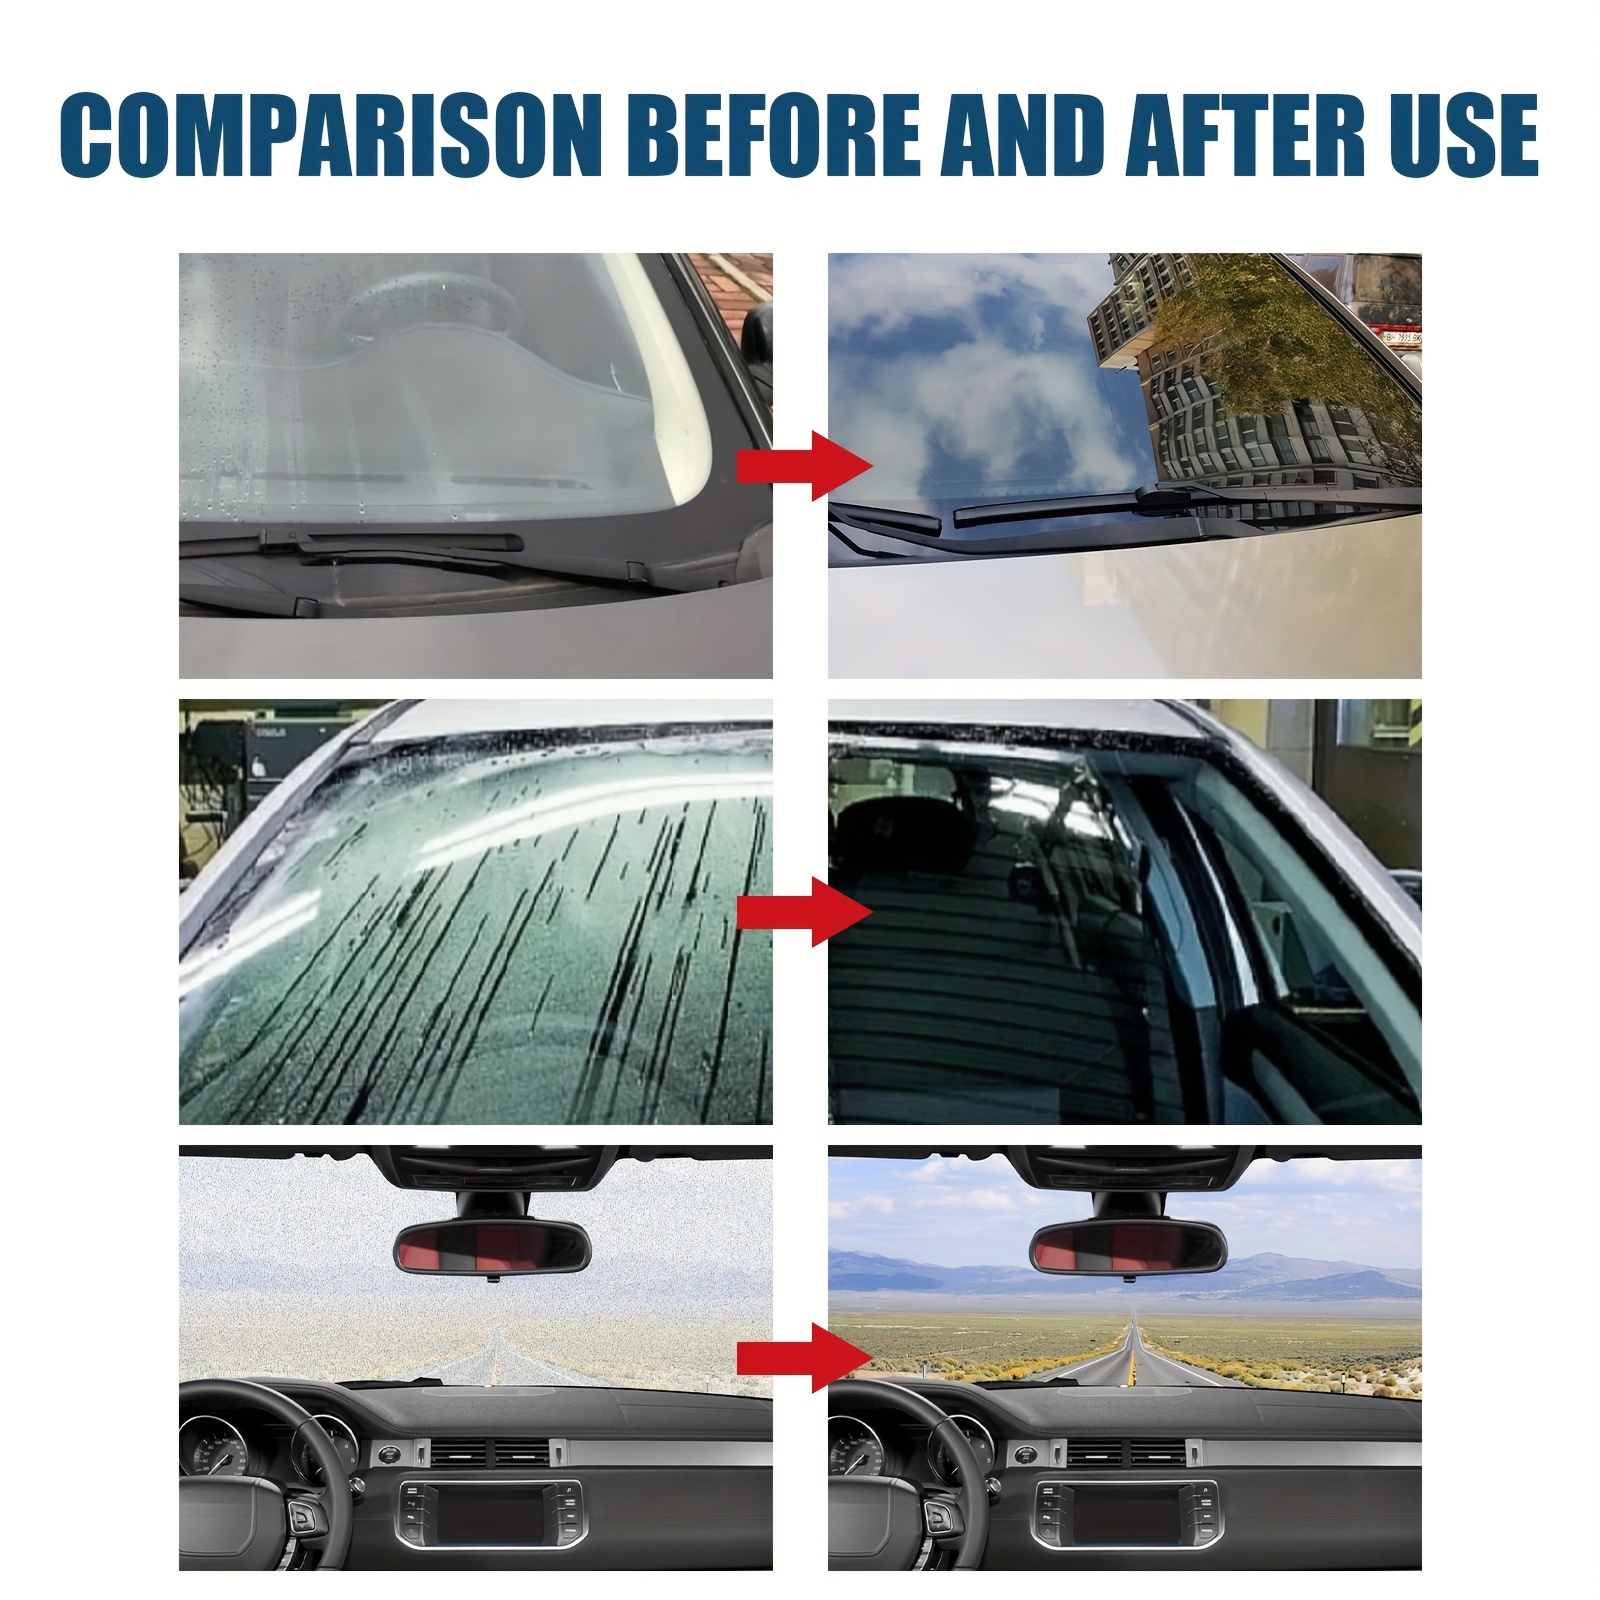 Anti-fog Coating Agent For Car Windshield, Rainproof And Waterproof Mirror  Spray, Car Accessories